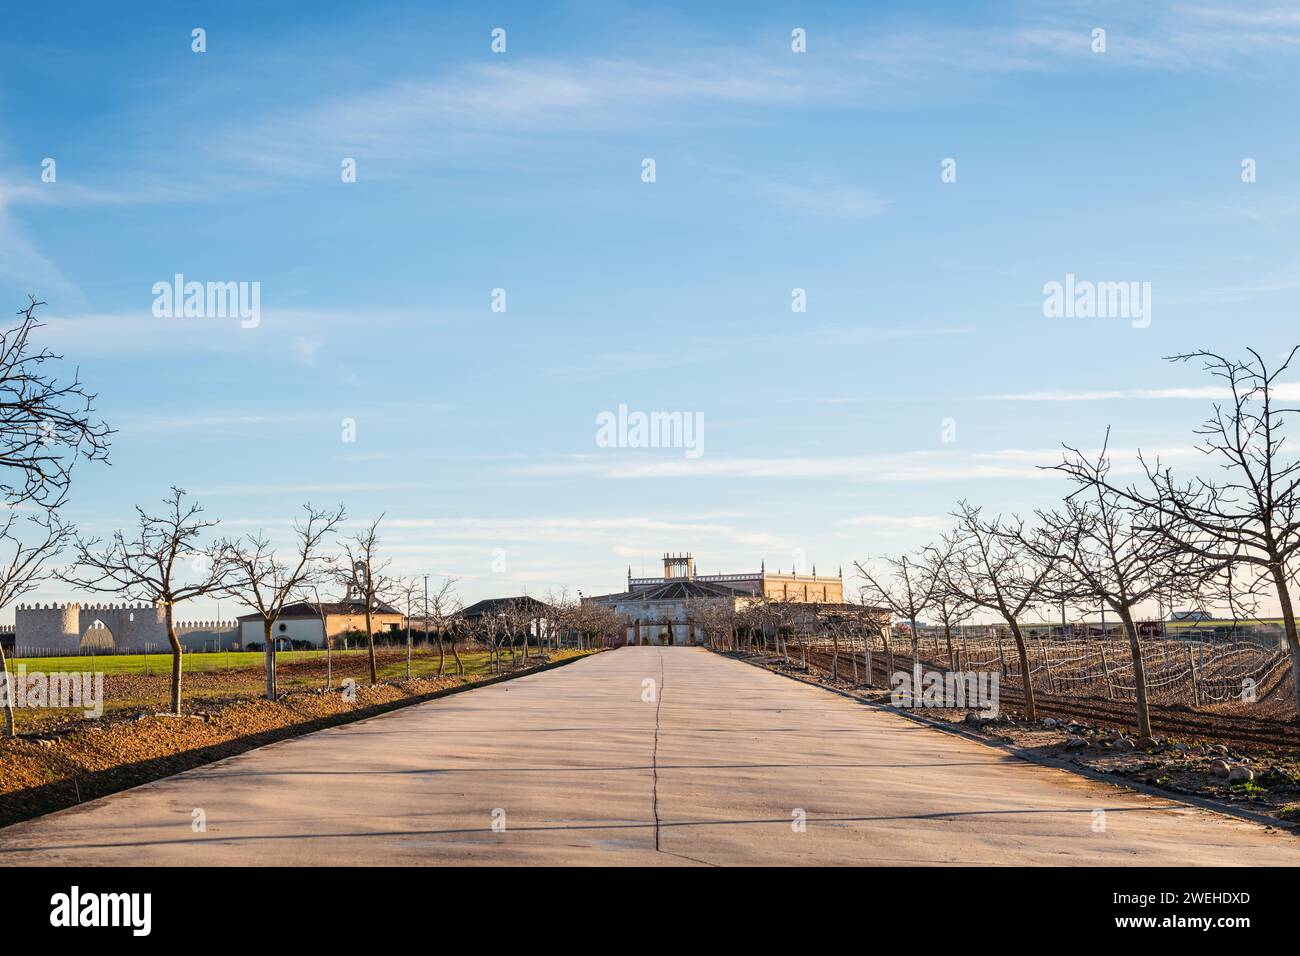 Low-angle view of the entrance to a winery in the outskirts of the Spanish town of Rueda in Valladolid, famous for its vineyards and wines. Stock Photo